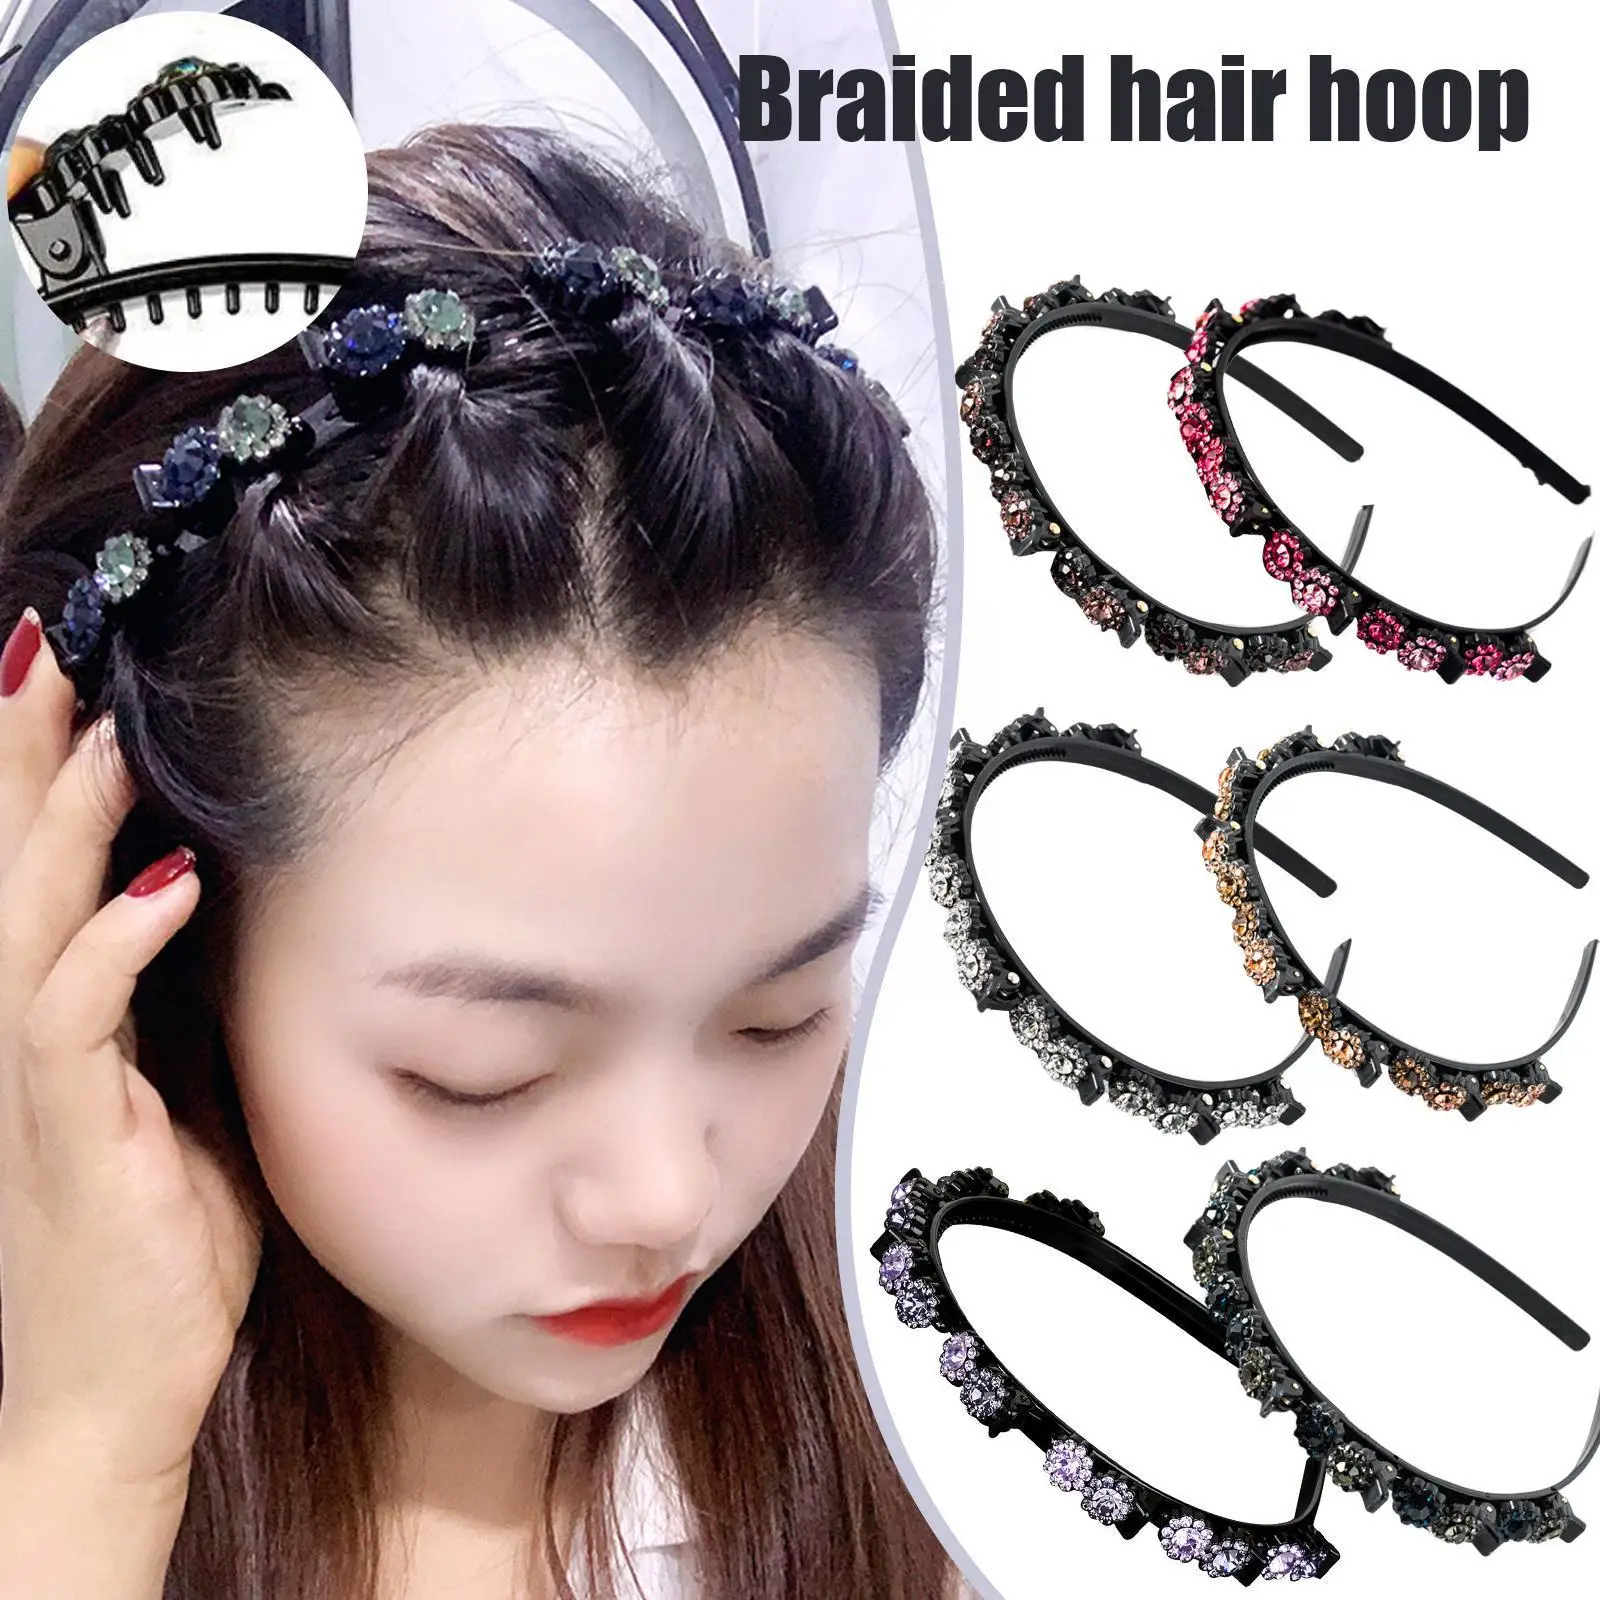 

Woman Double Layers Hairband With Clips Twist Clip Hollow Bezel Accessories Braid Hairstyle Headband Hair Turban Lady C0O1